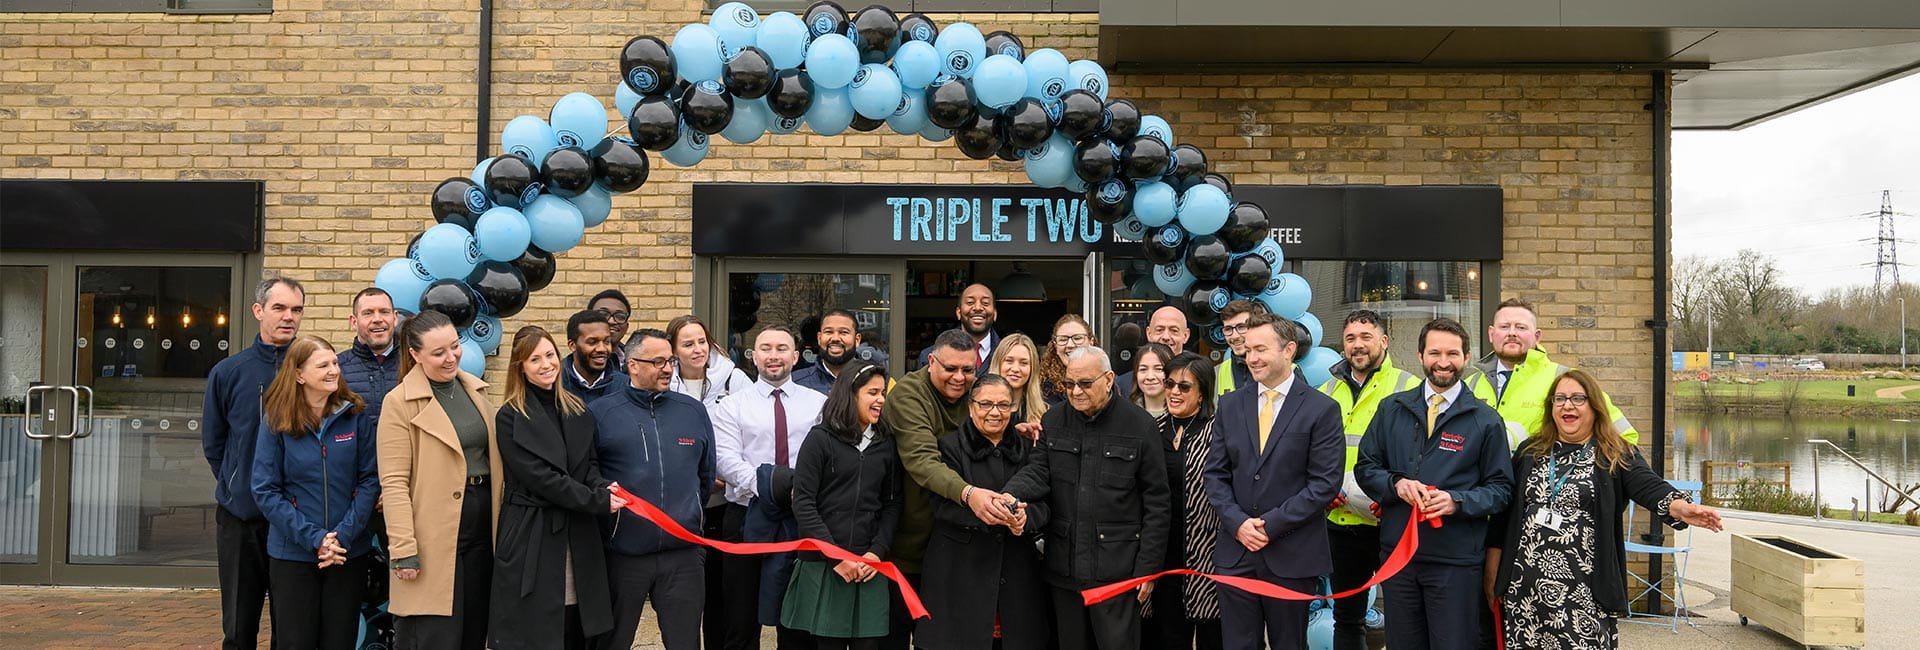 News and Insights - People celebrating the opening of Triple Two Coffee Shop